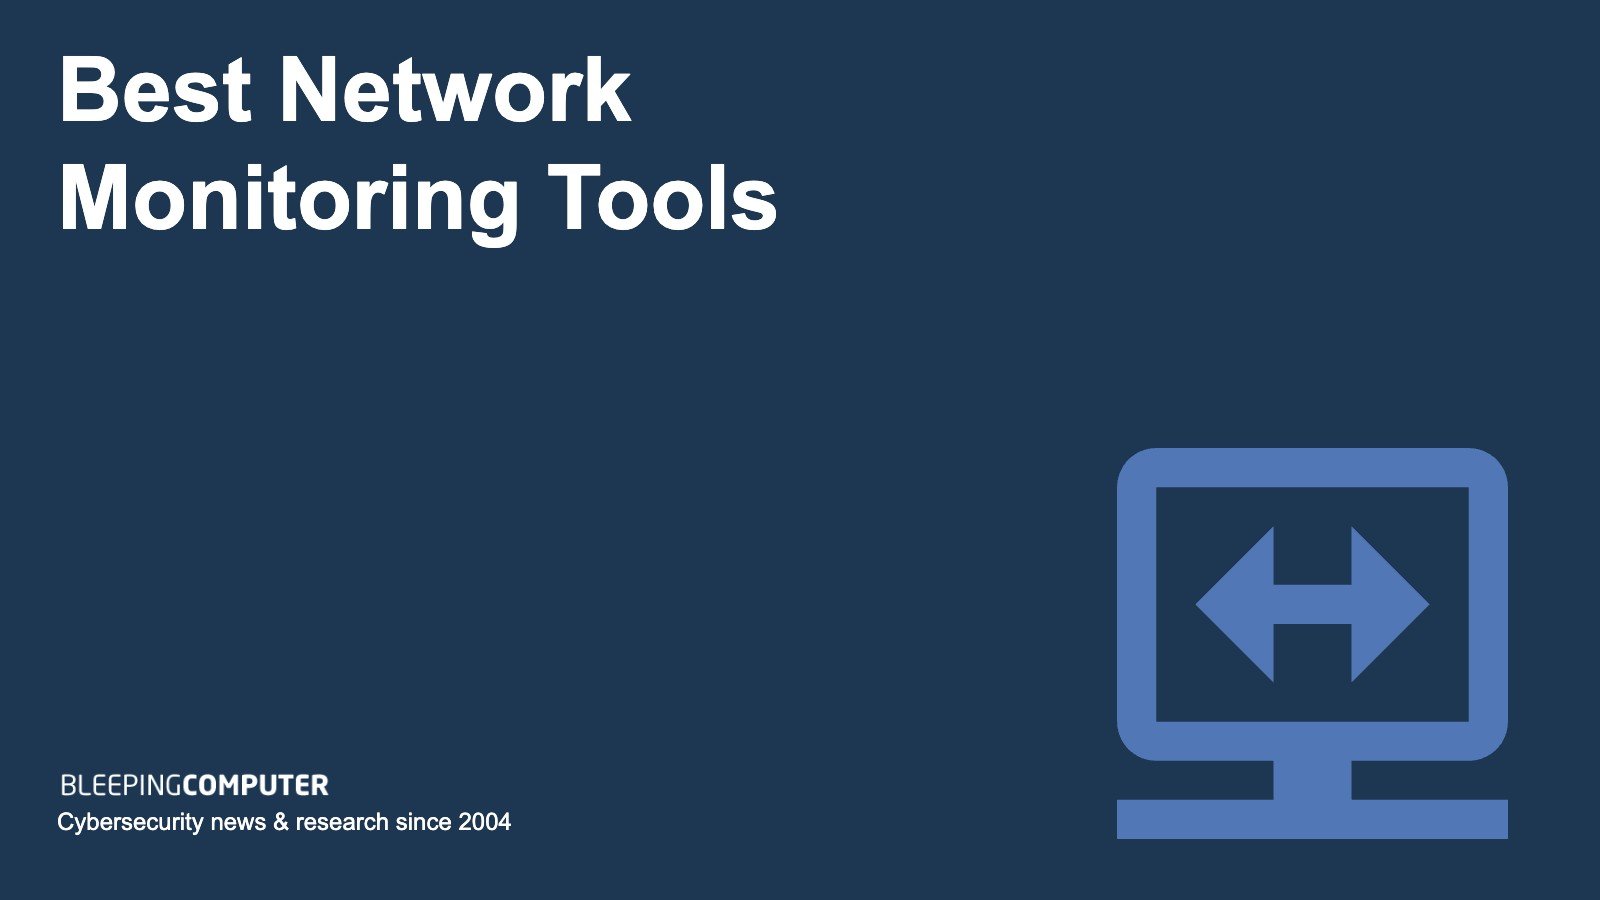 Best Network Monitoring Tools